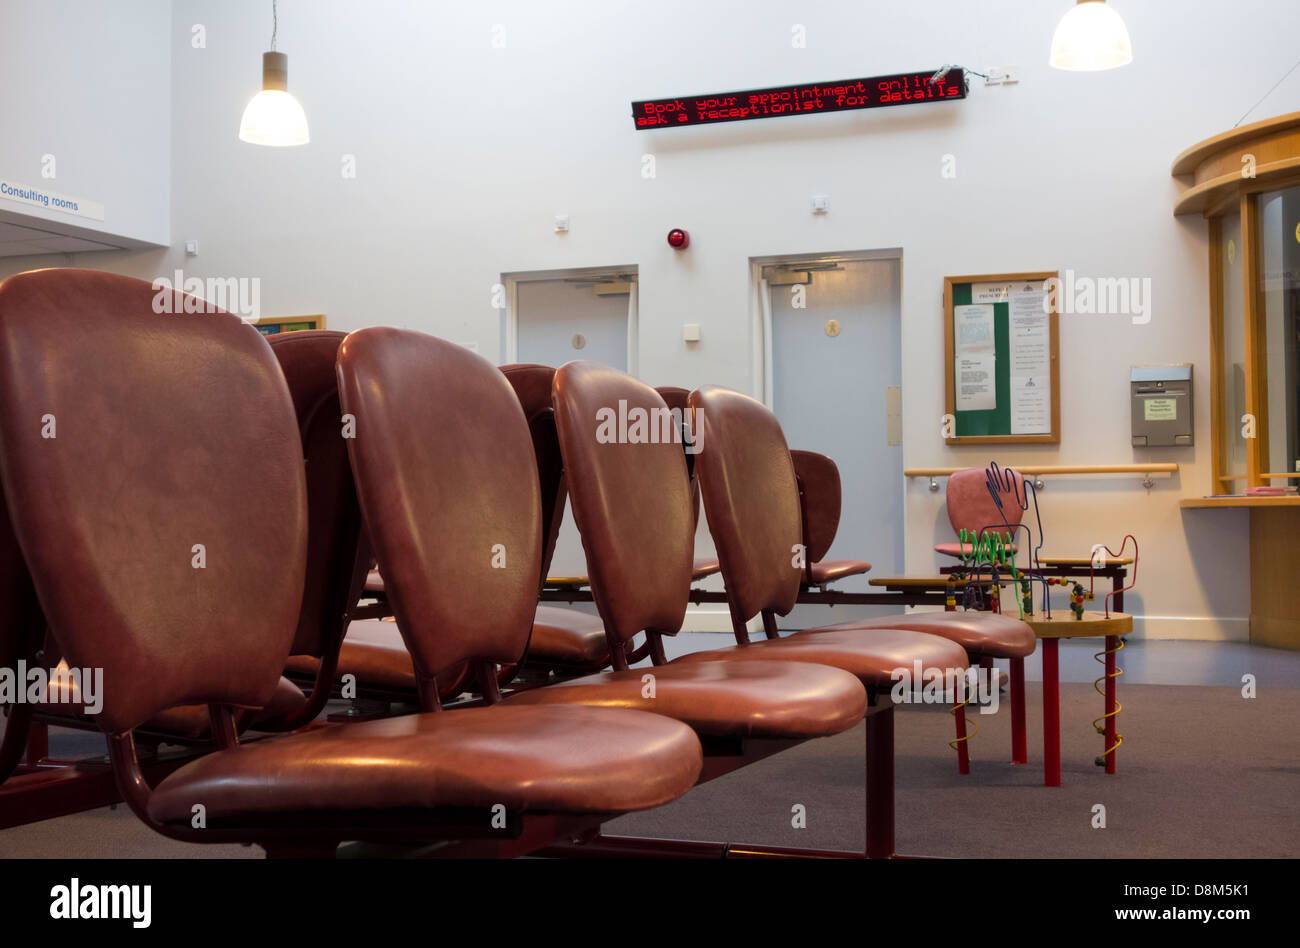 Empty seats in a doctors surgery with an electronic noticeboard advising appointments can be booked online Stock Photo